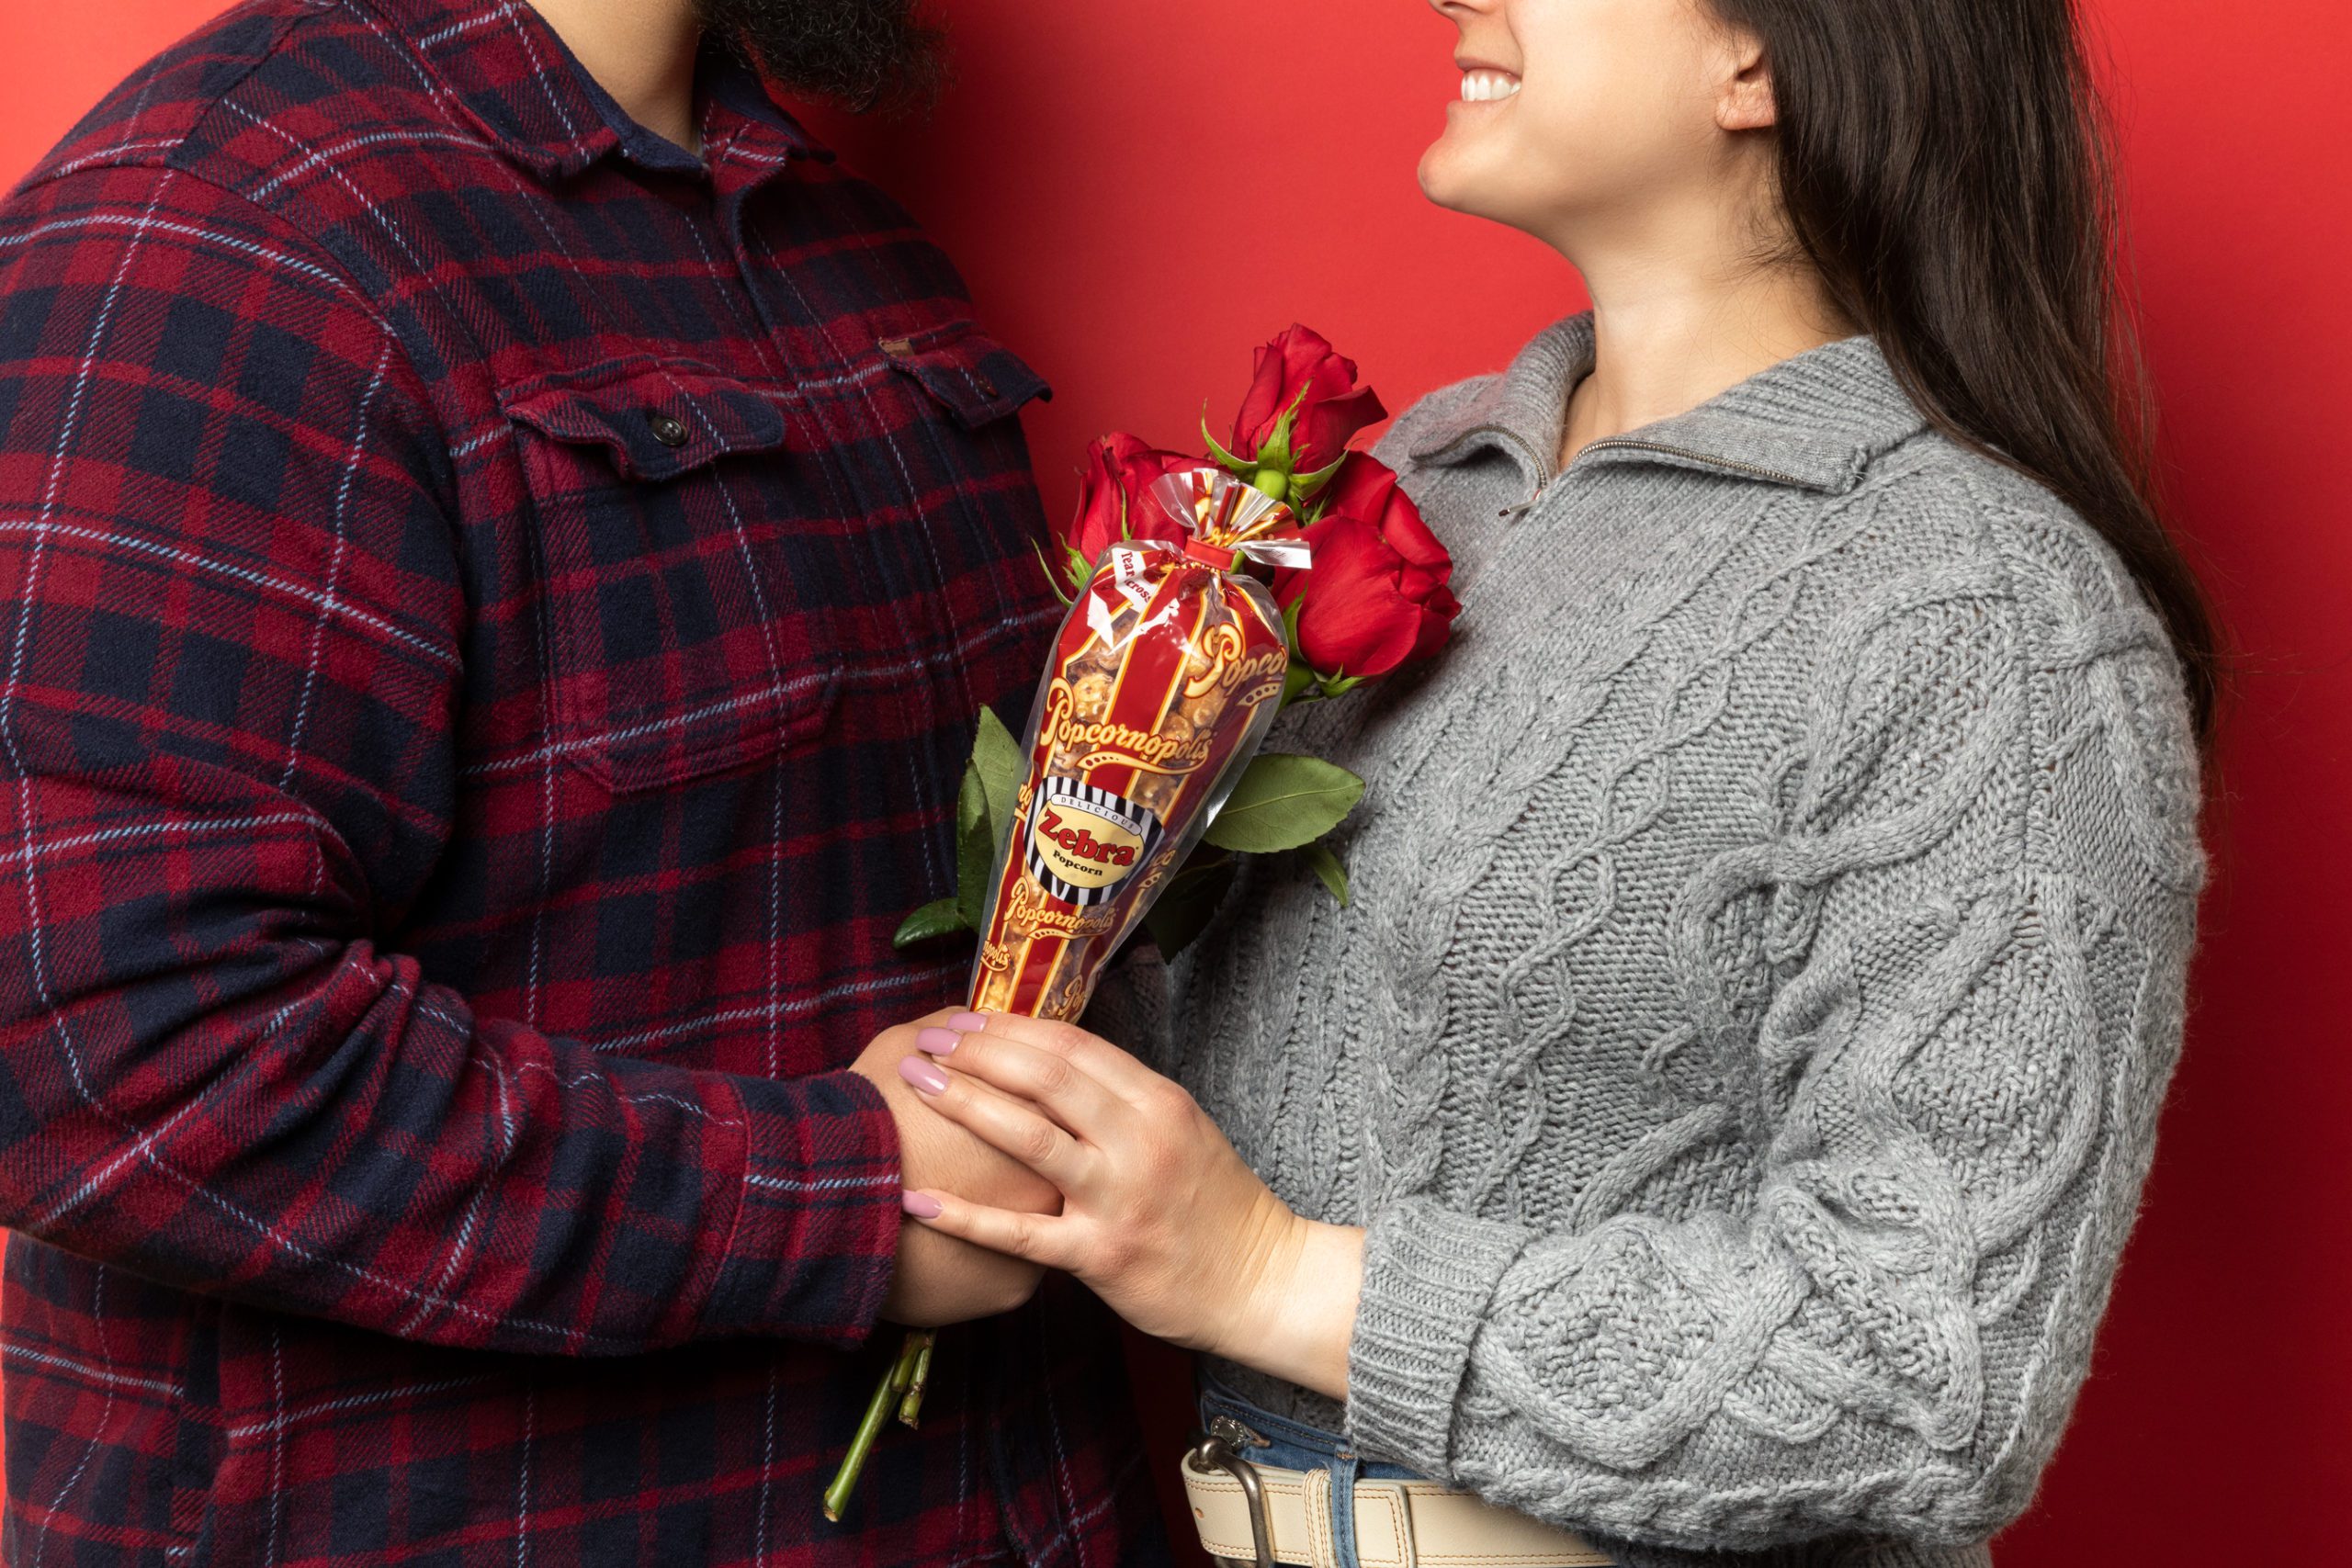 Picture of a man in a stripe red, blue and white flannel holding a mini cone flavored of Zebra® Popcorn and 4 long stem red Rosas. A woman with a gray wool gray sweater holding the man's hand. Red background.